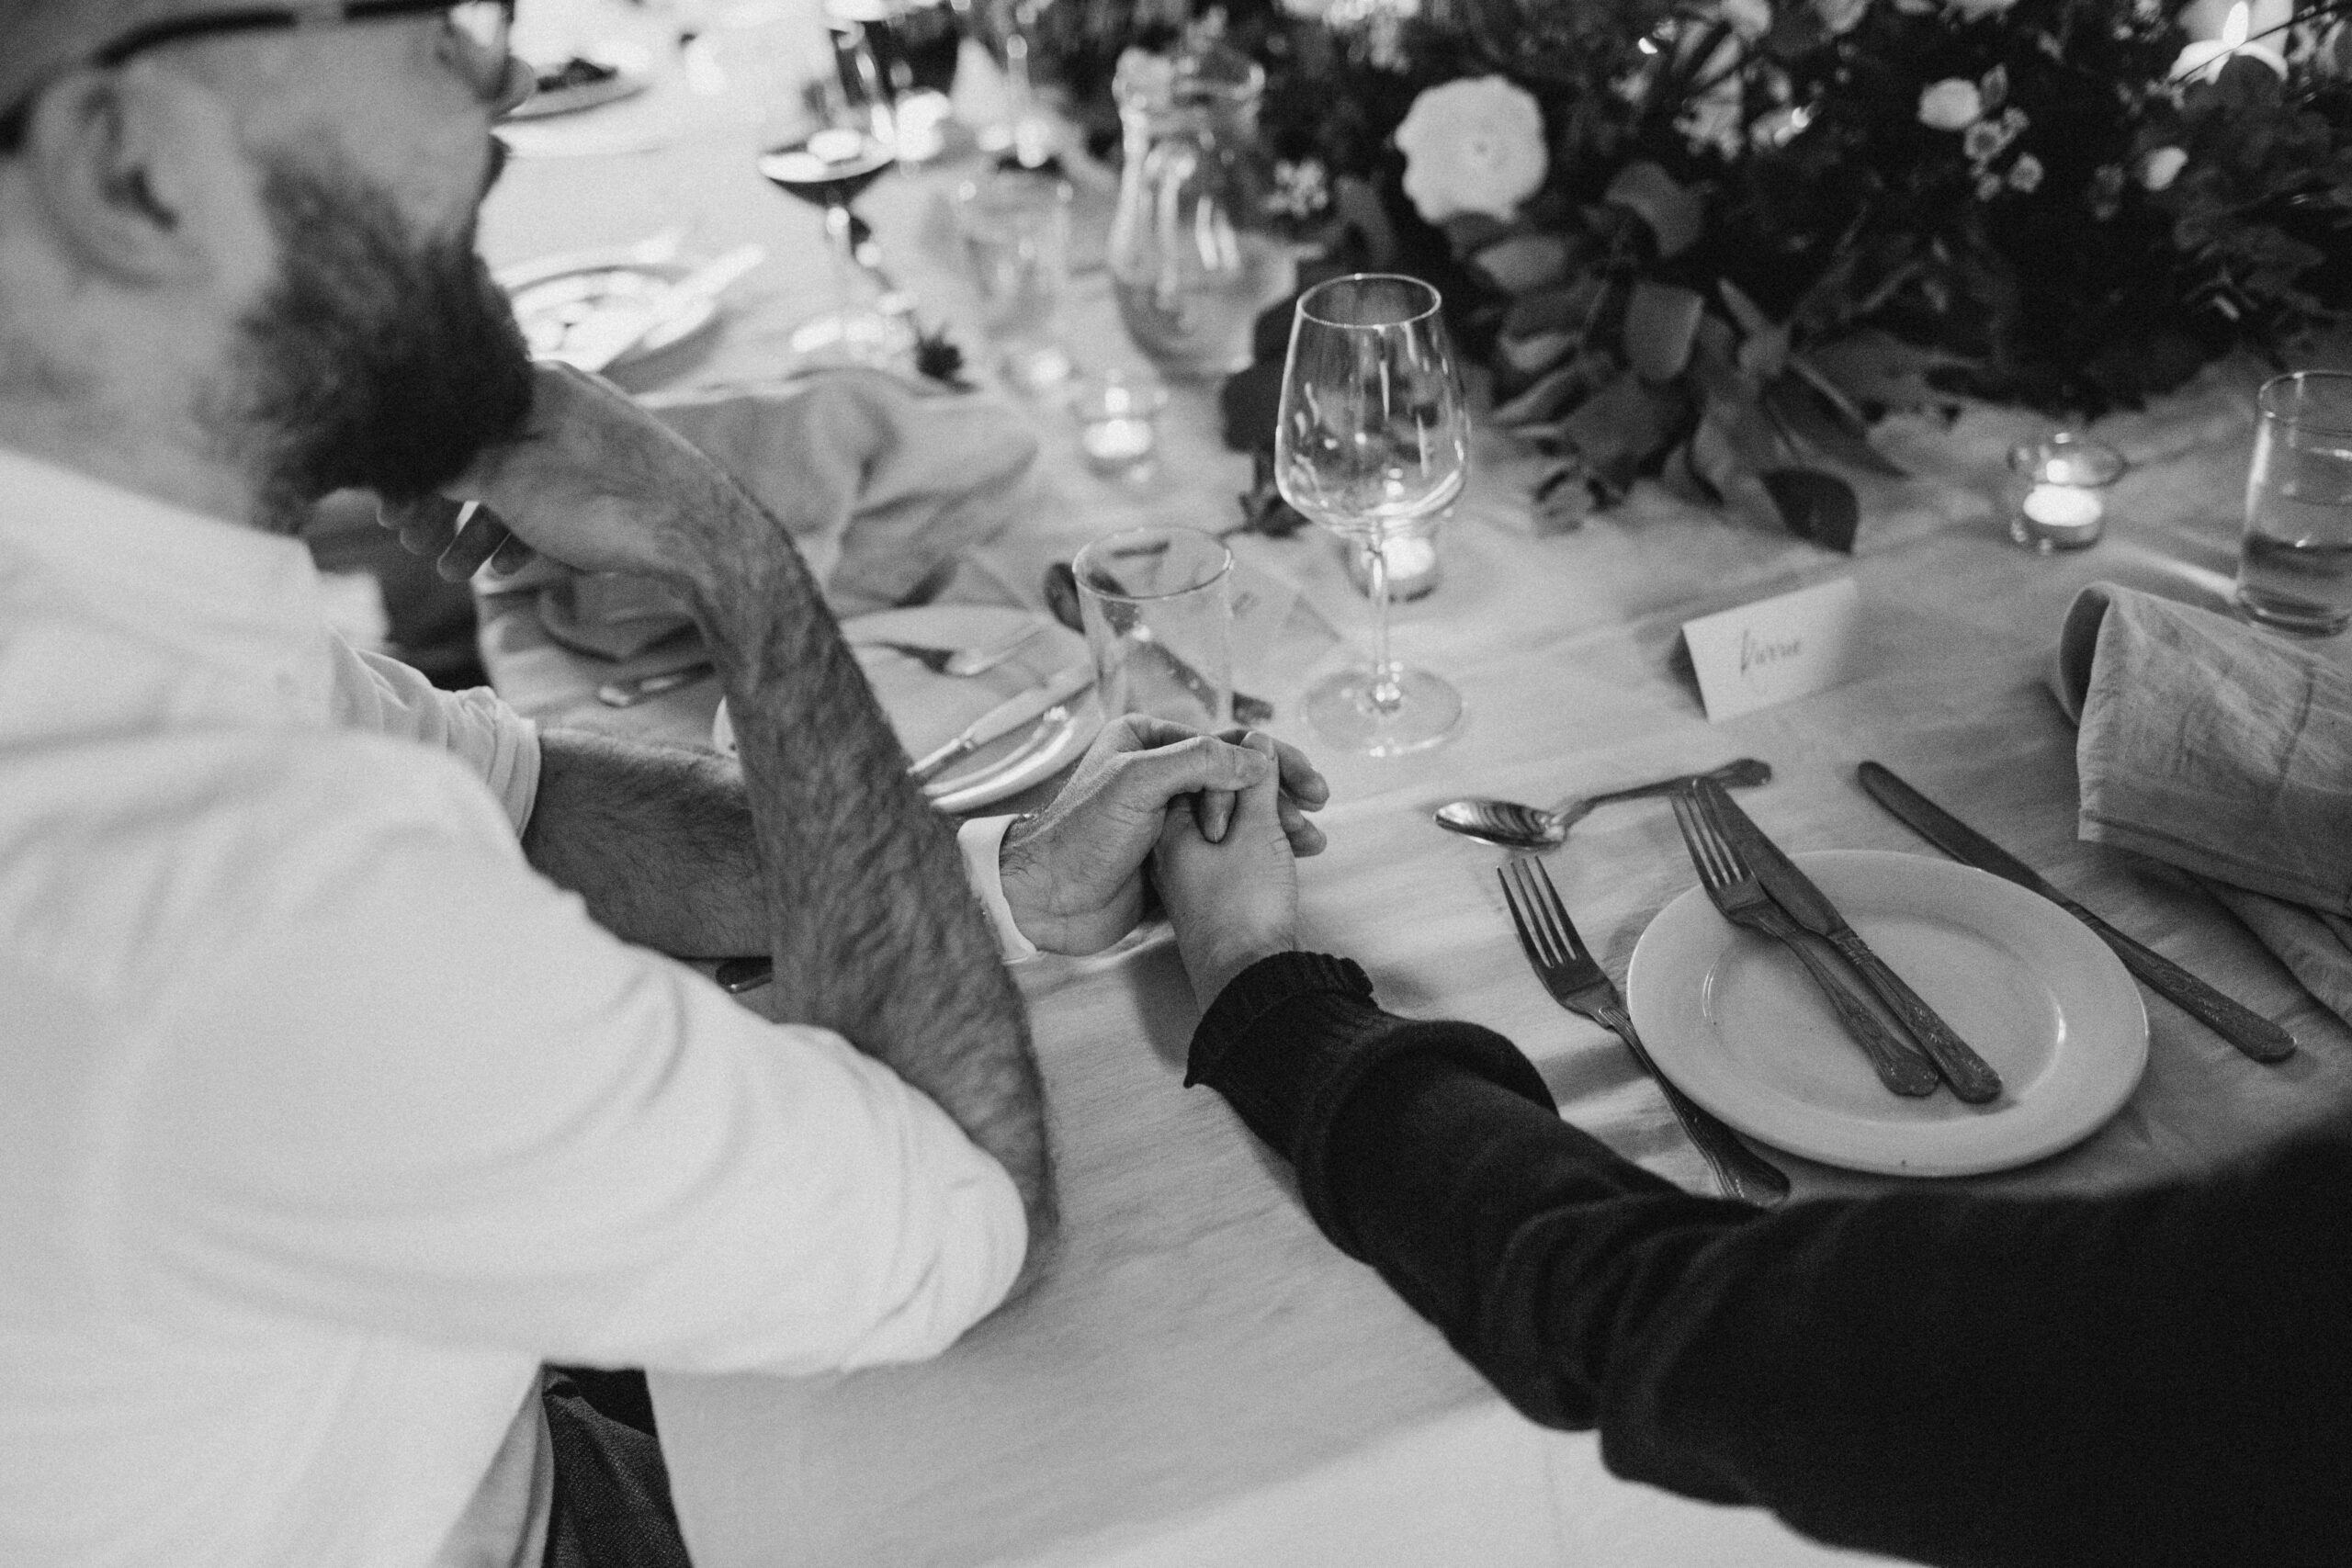 hands embracing on the dinner table